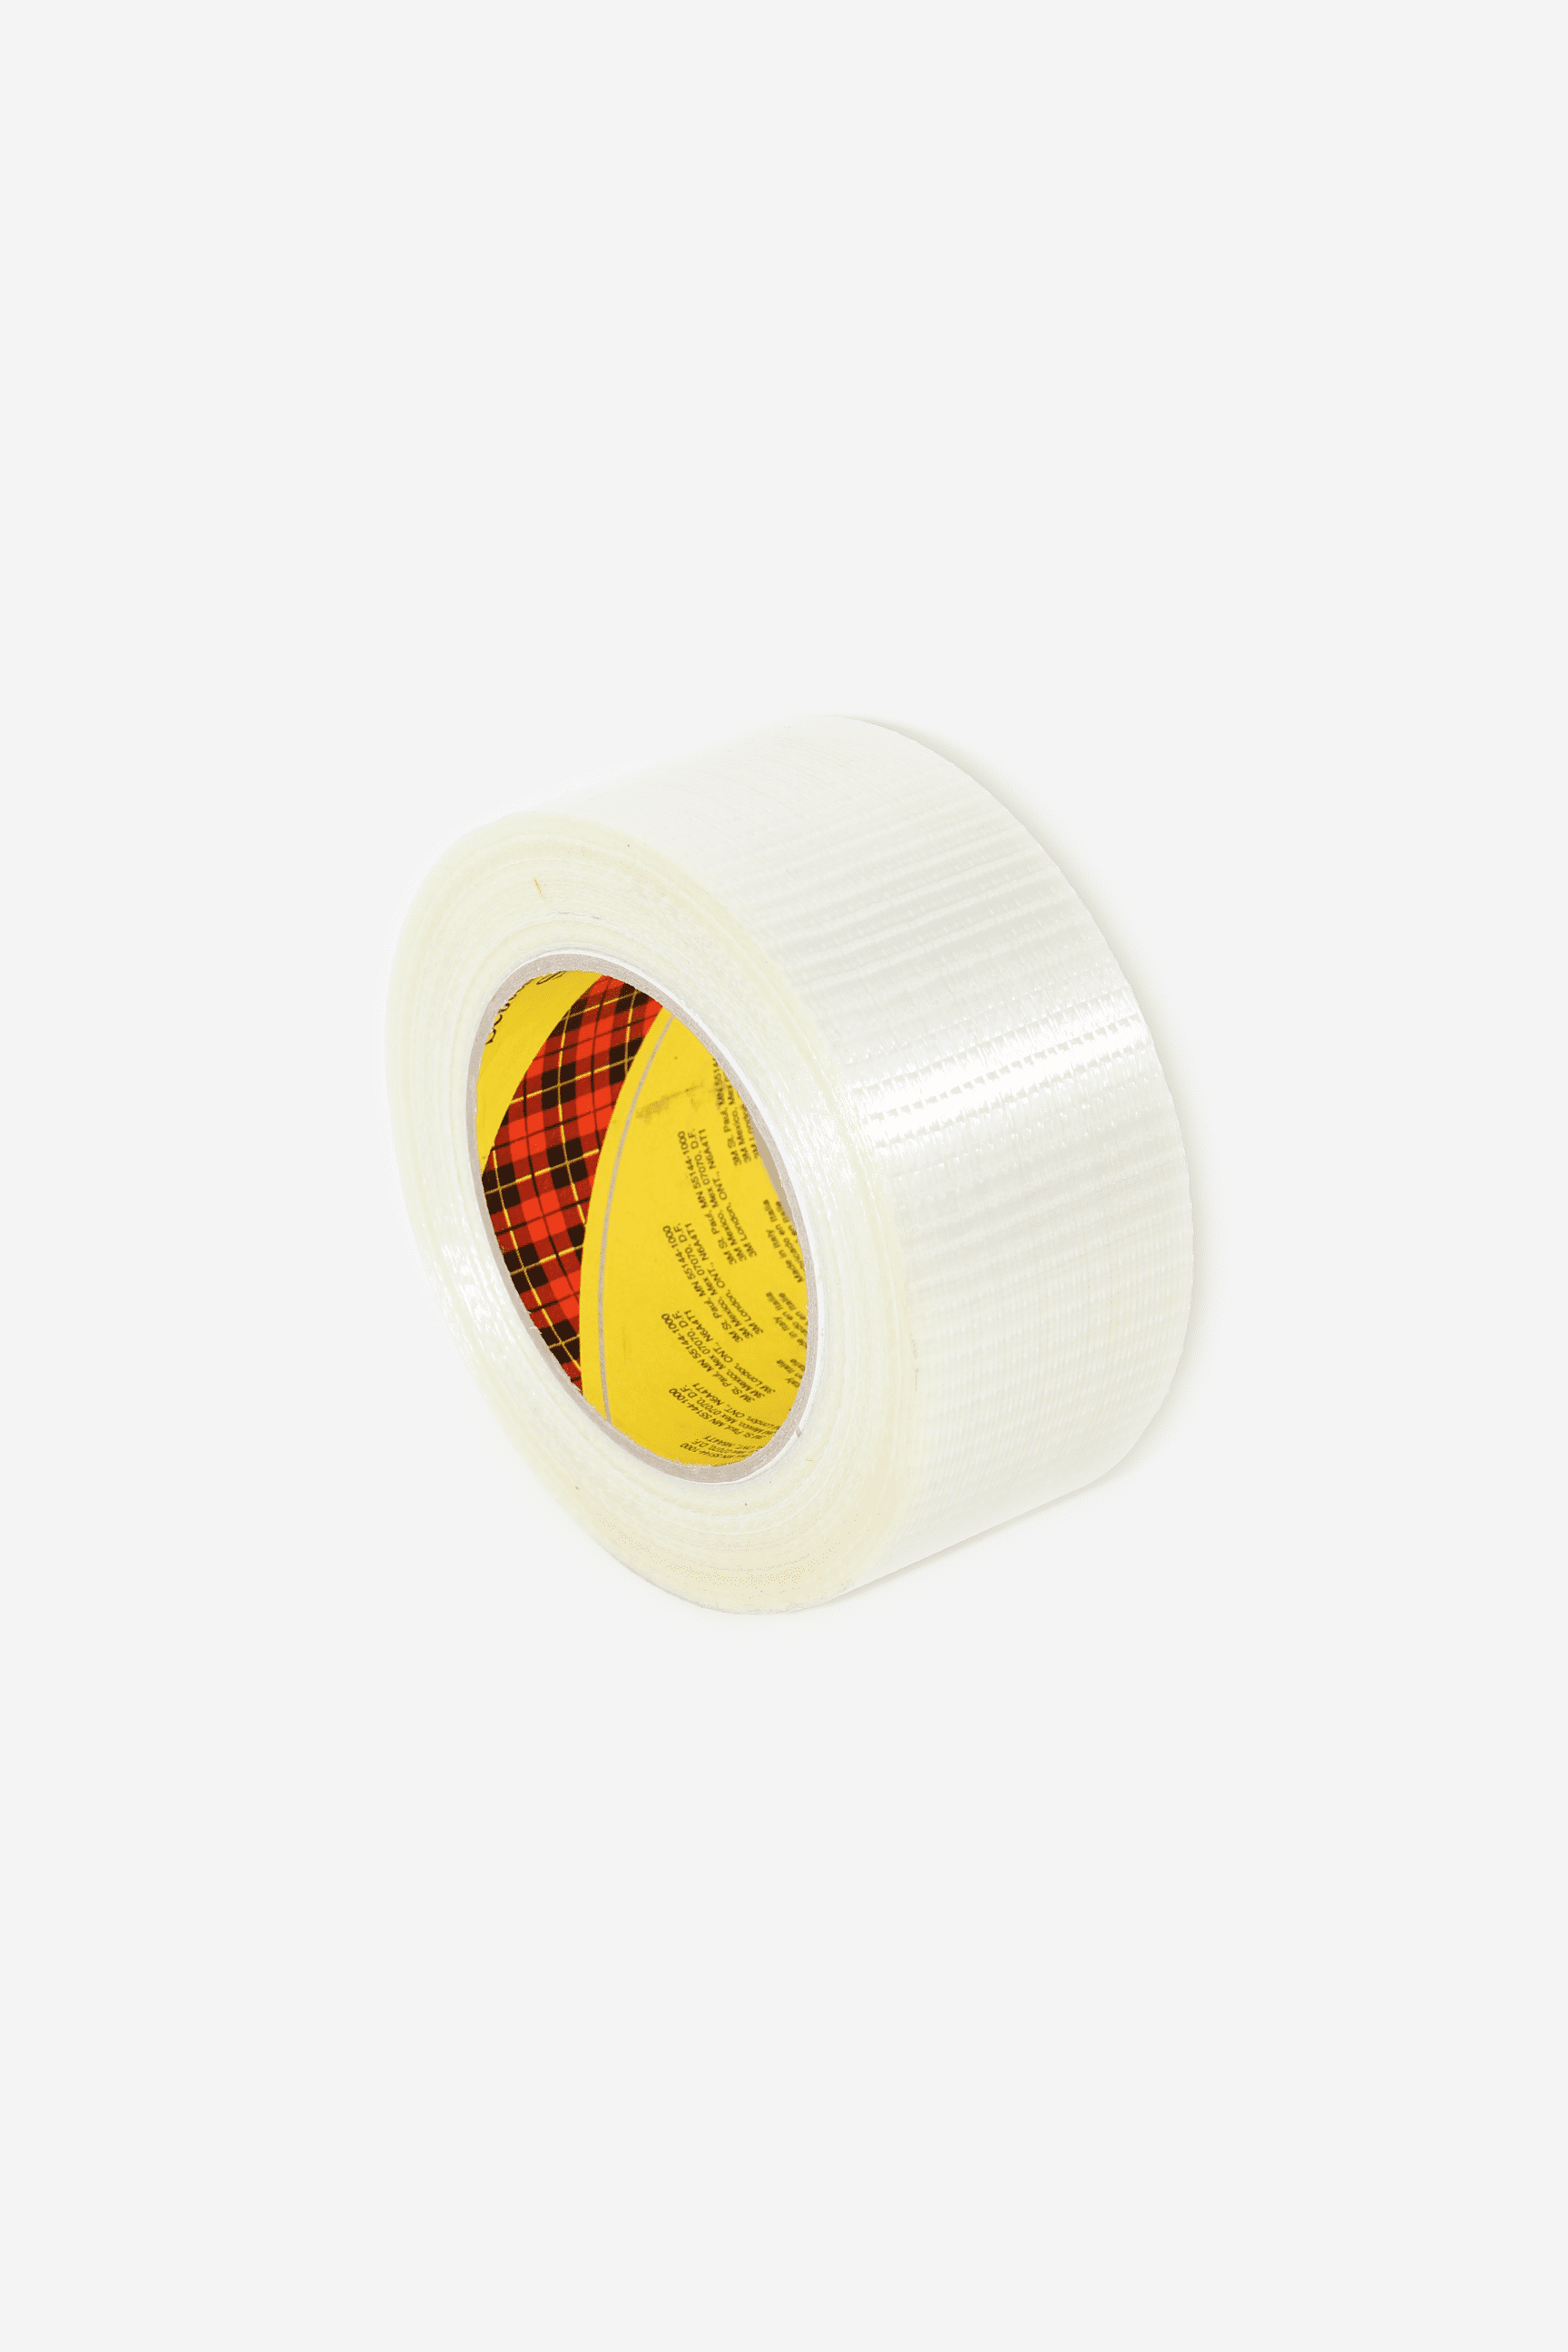 BOMEI PACK 5.5mil Reinforced Mono Filament Clear Strapping Tape 4